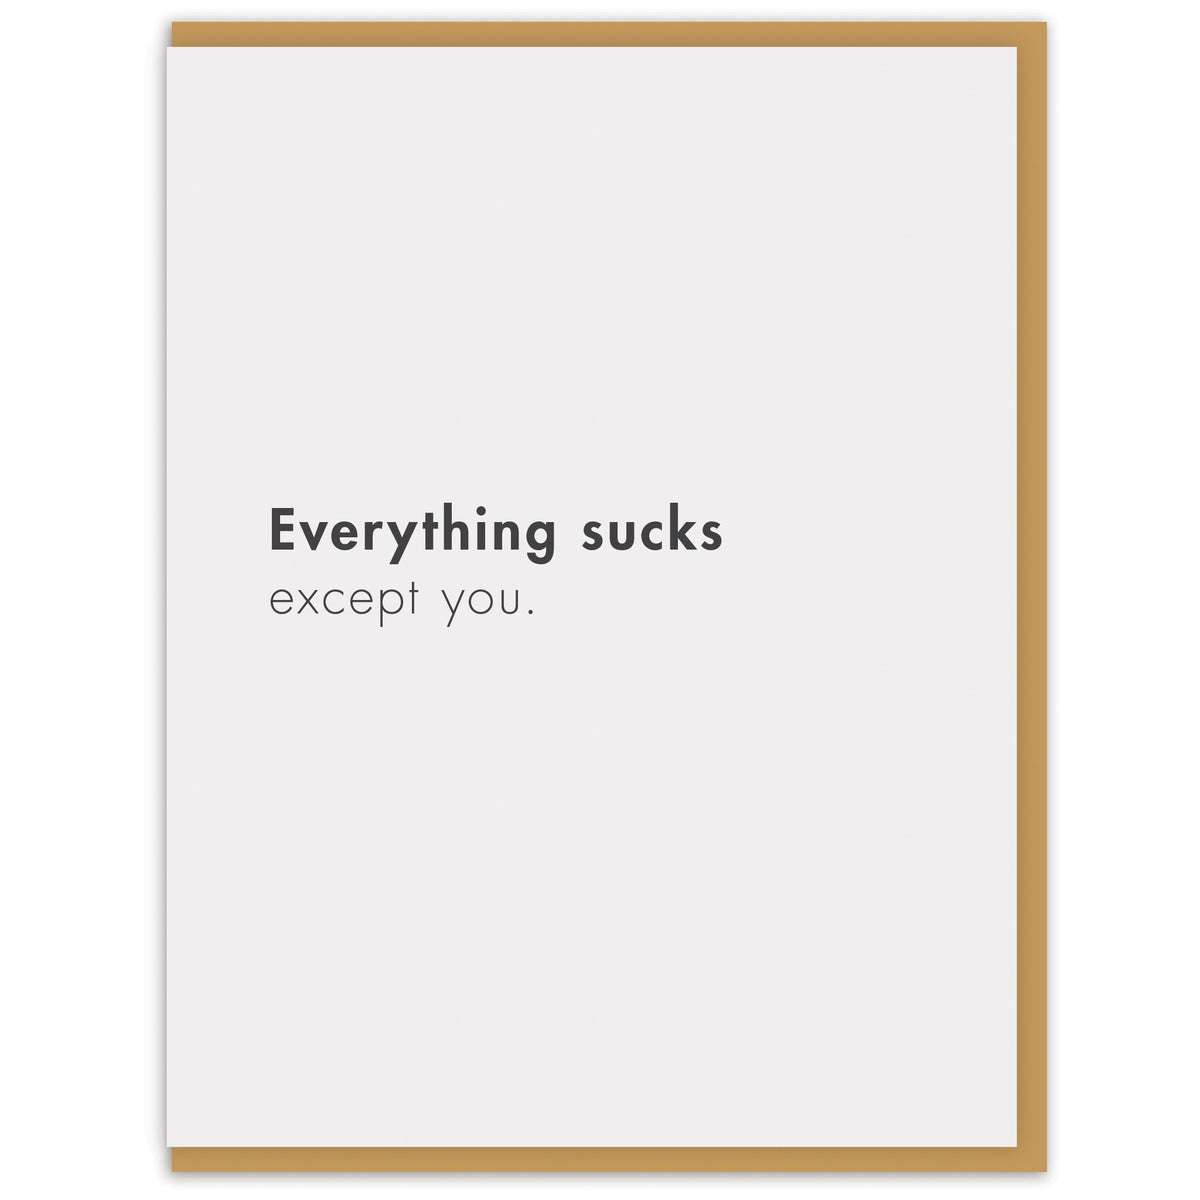 Everything sucks except you.